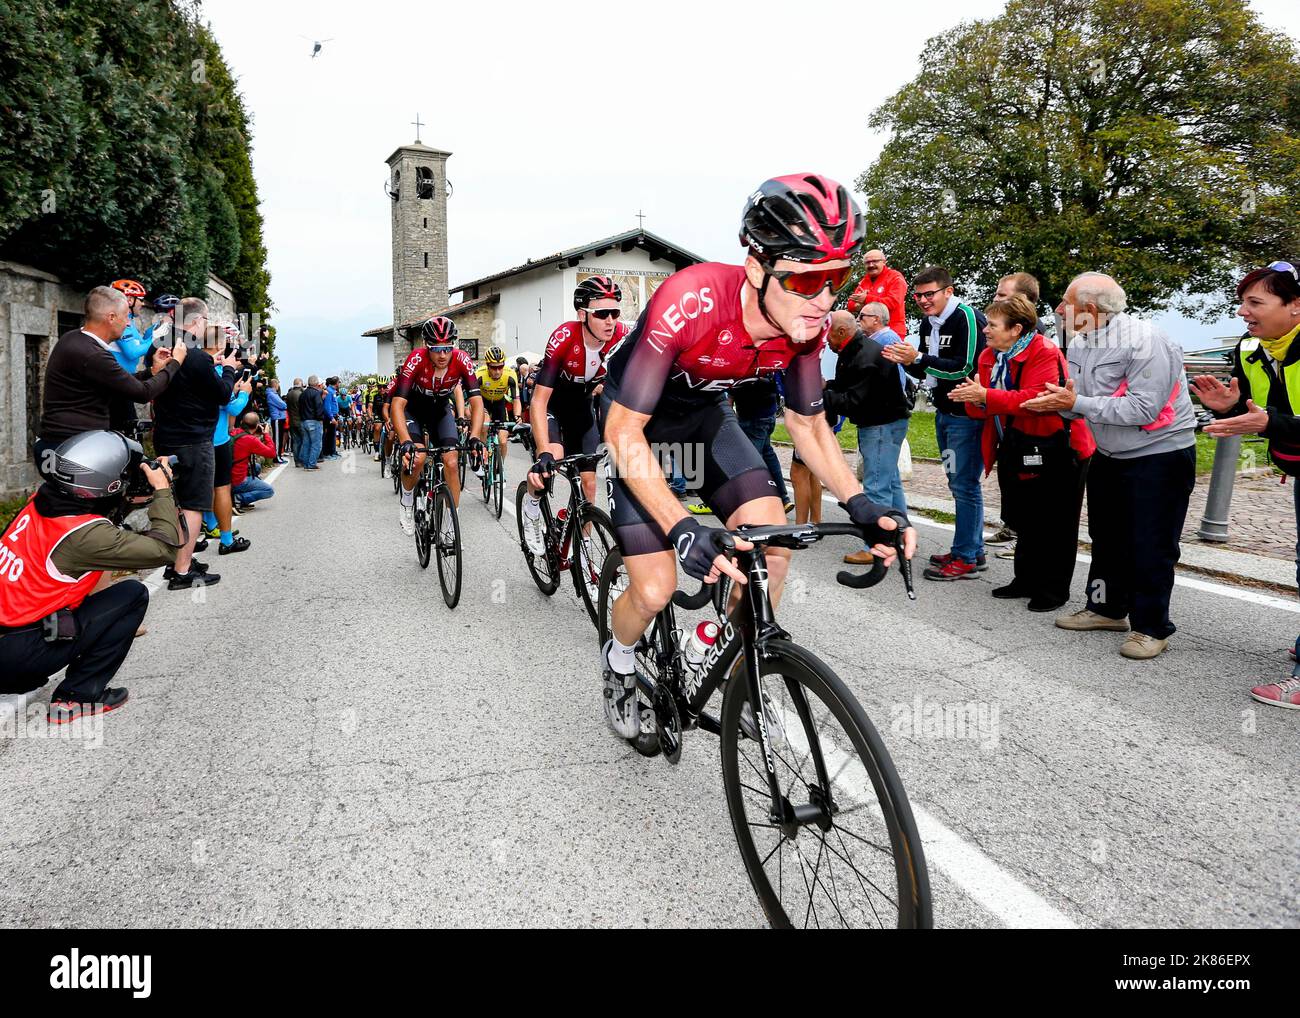 Team Ineos during the Il Lombardia 2019 race in Lombardia, Italy on Saturday October 12, 2019. Stock Photo